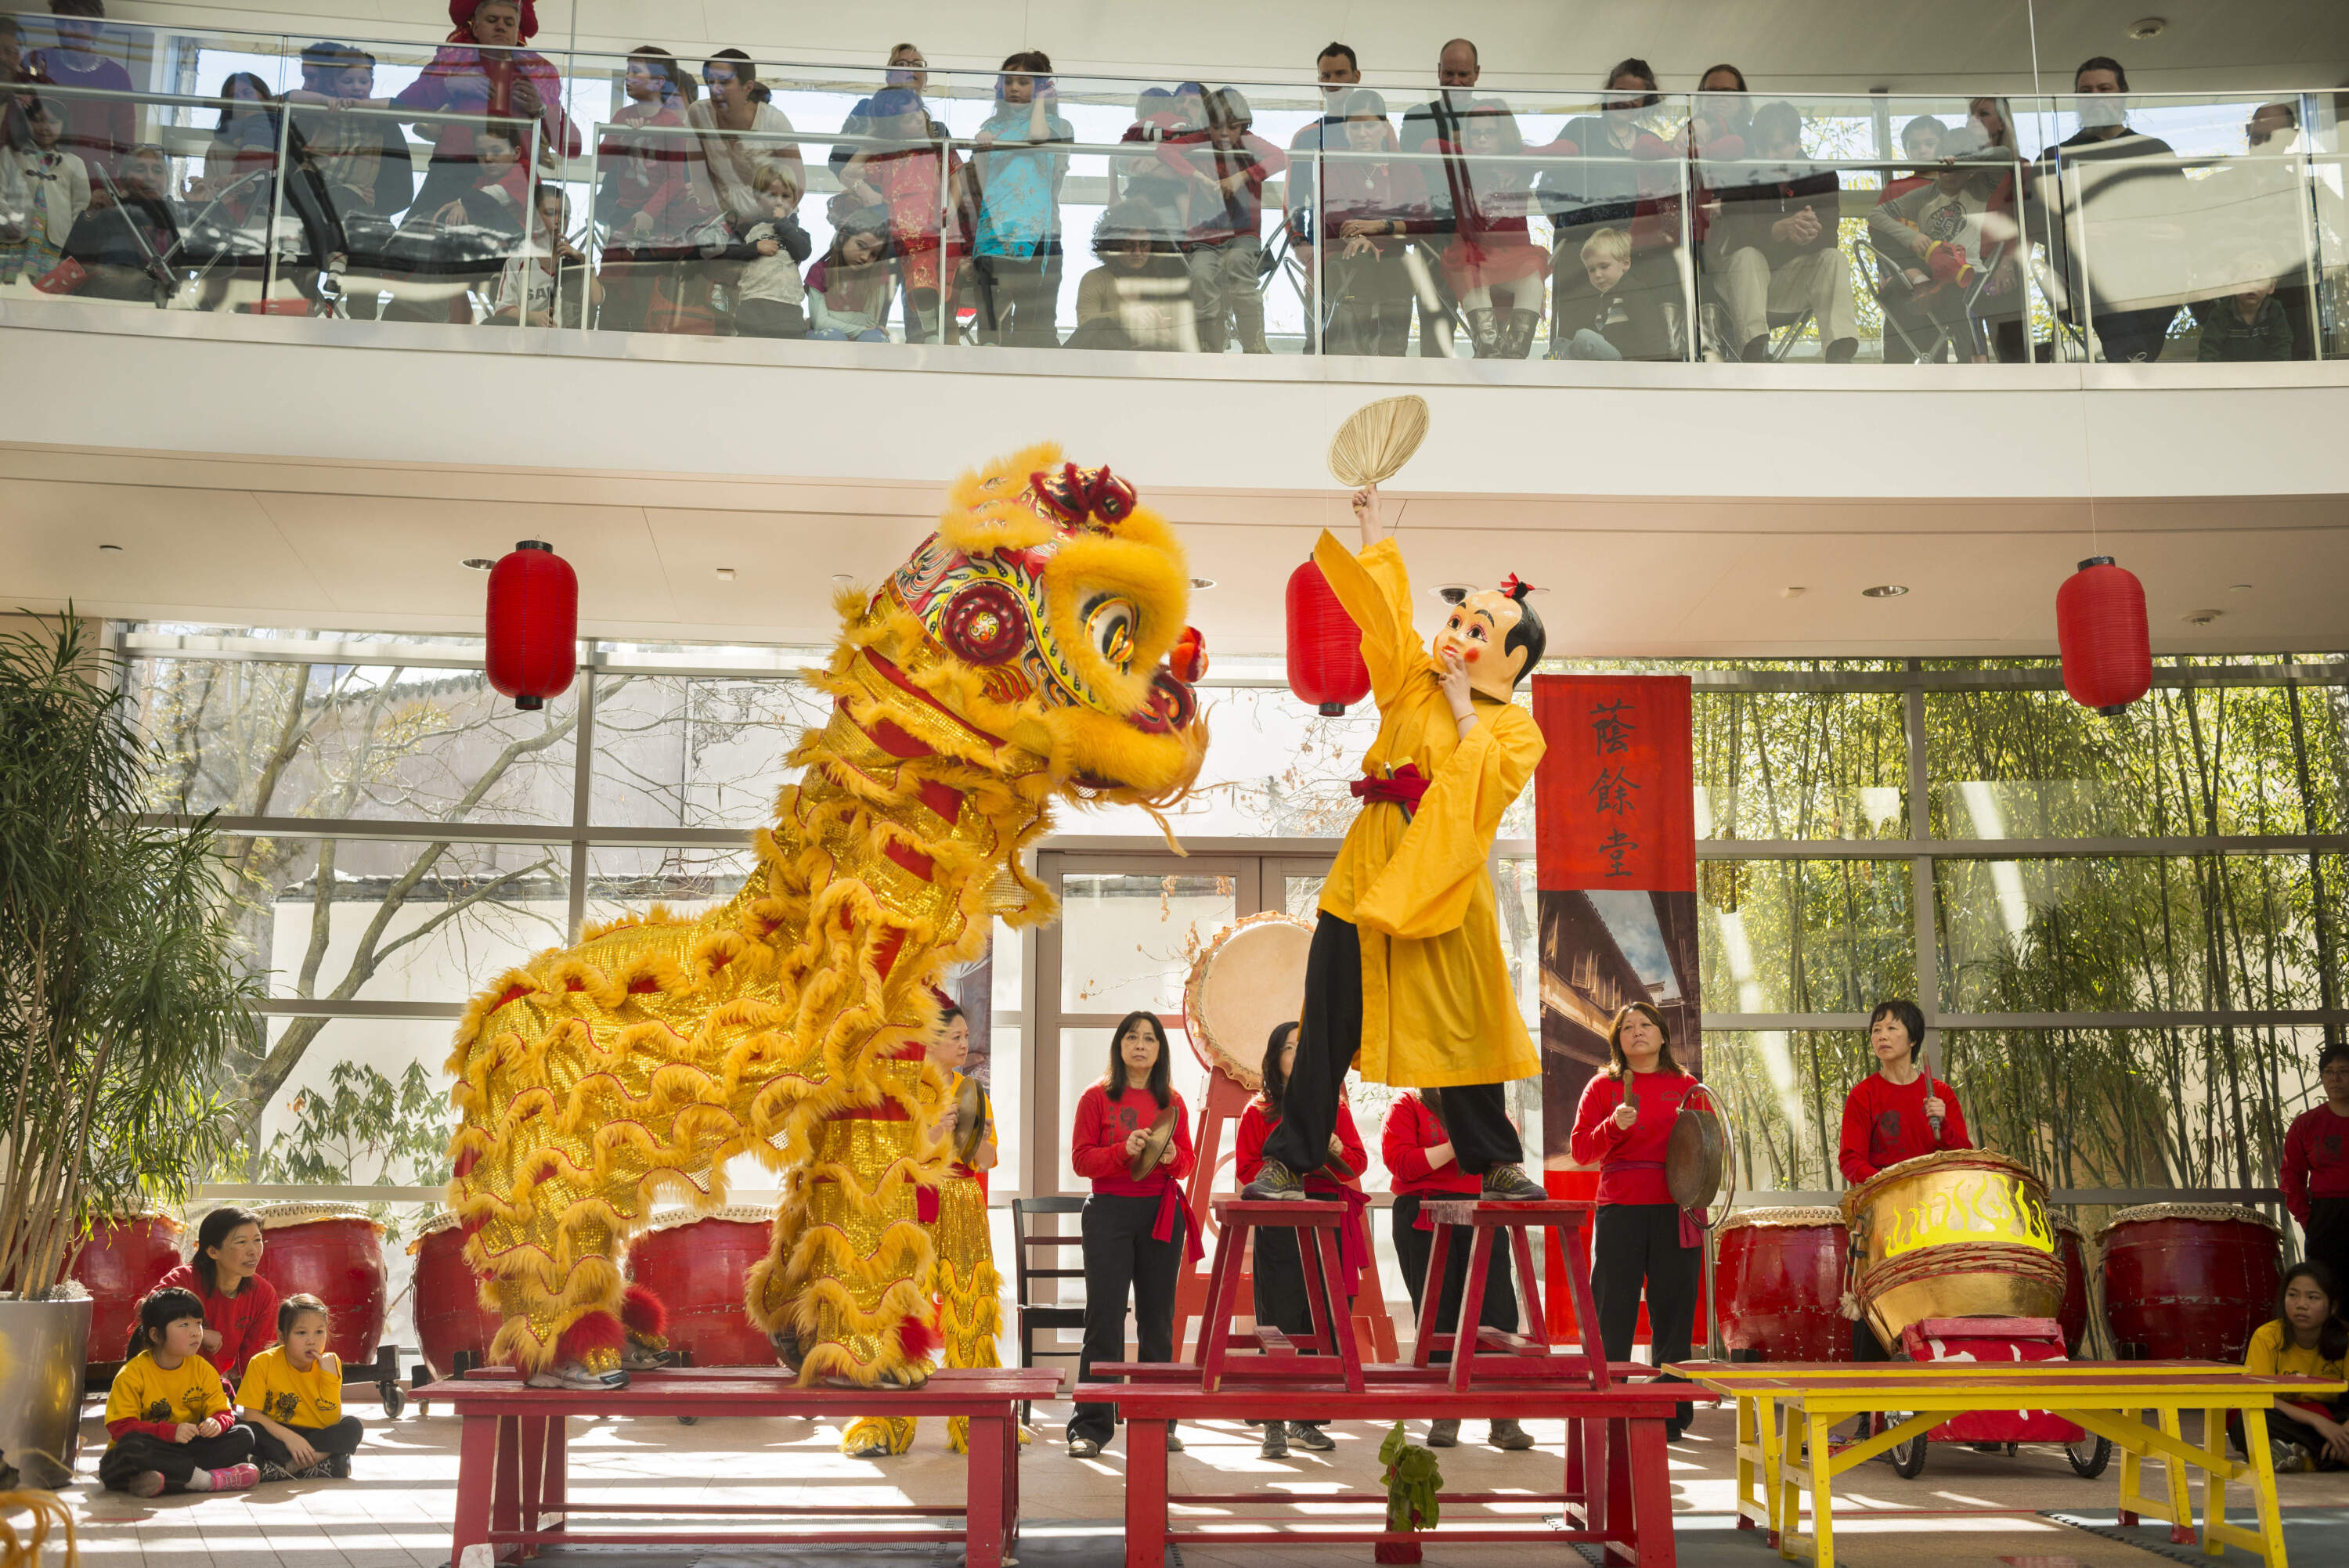 2024 Lunar New Year Celebration at the Children's Museum